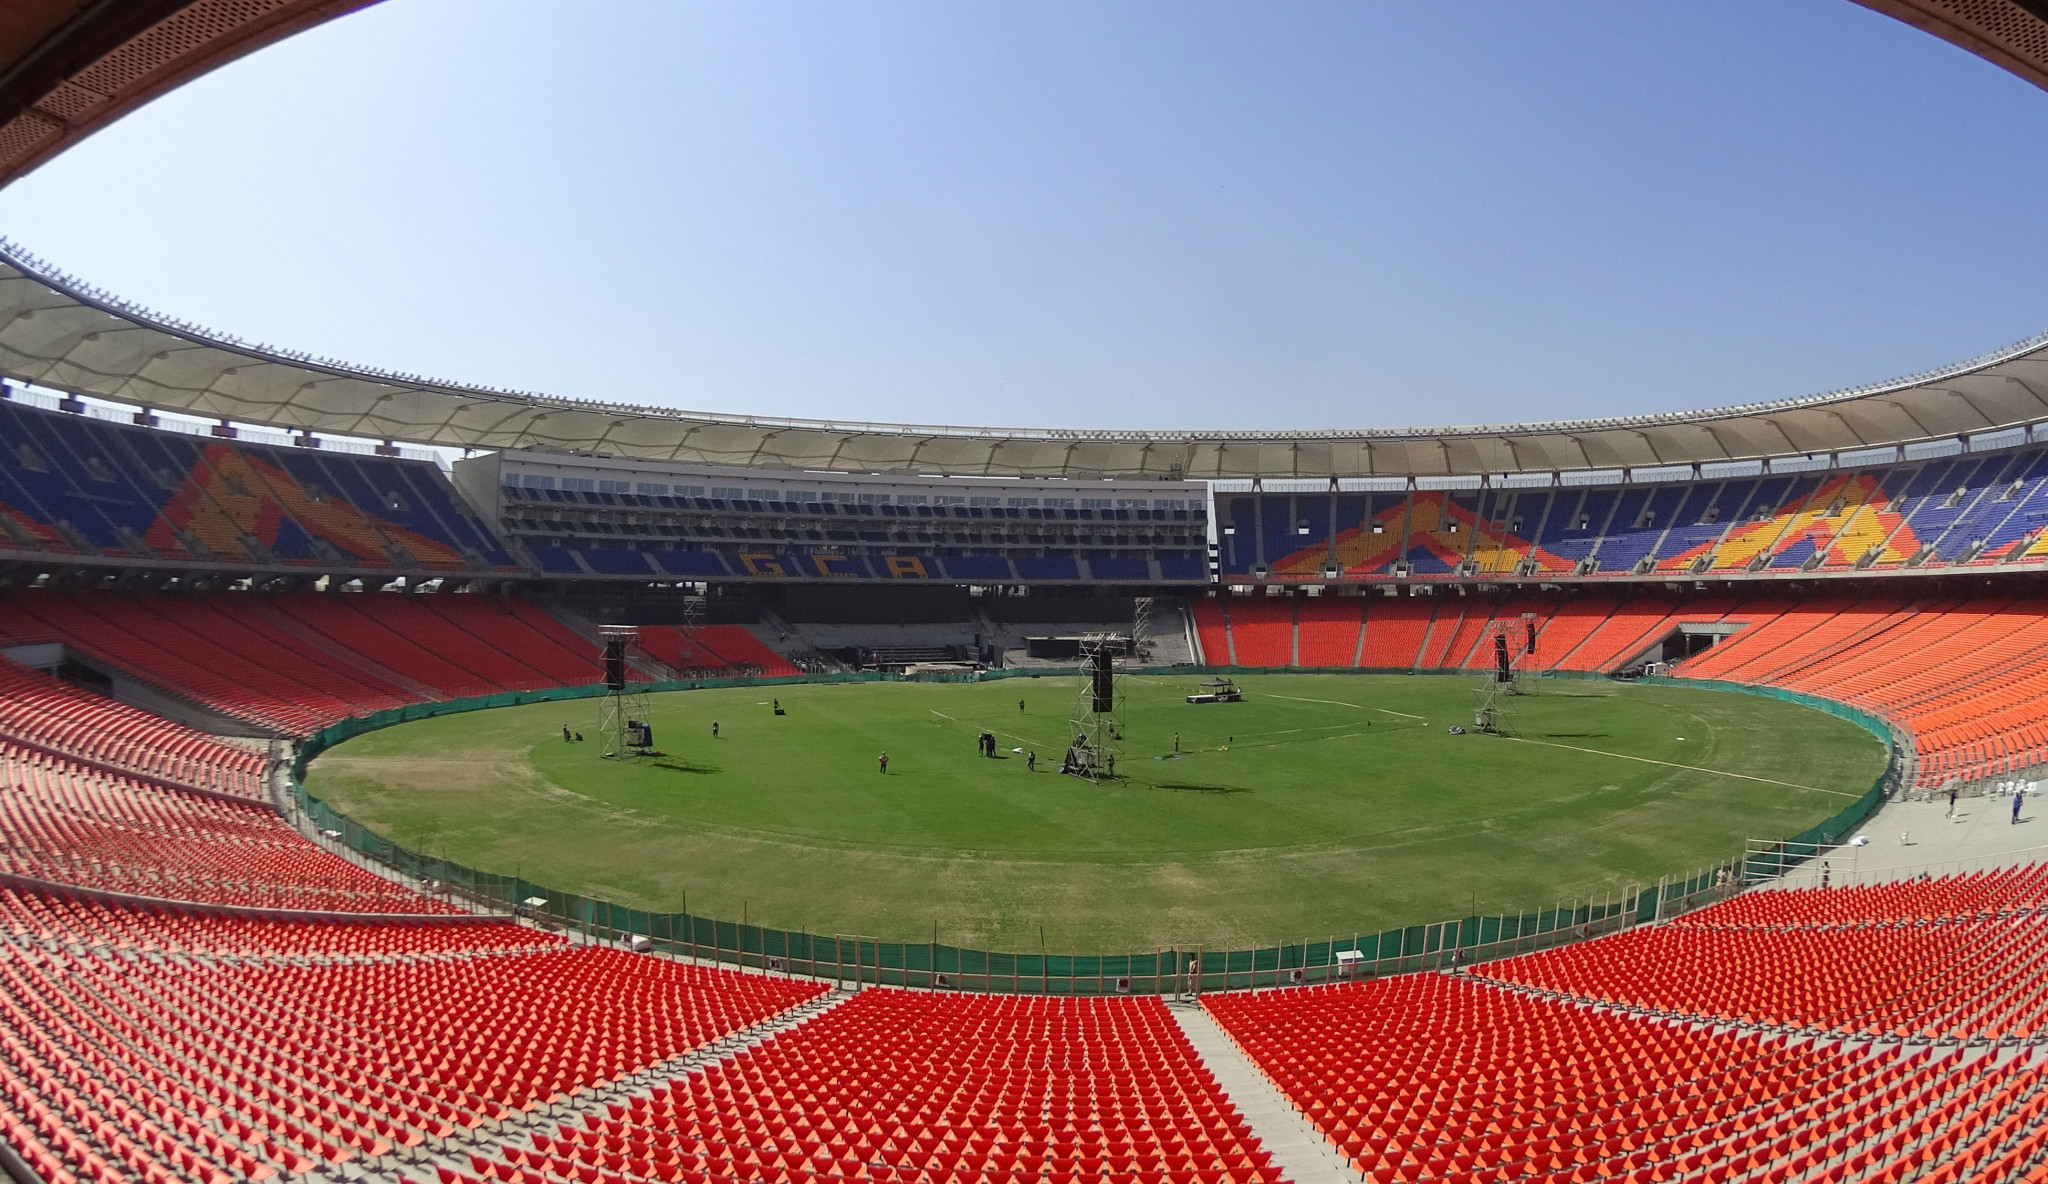 The Narendra Modi Stadium in Ahmedabad has been suggested as the Opening Ceremony venue for an Olympic Games in India ©Getty Images